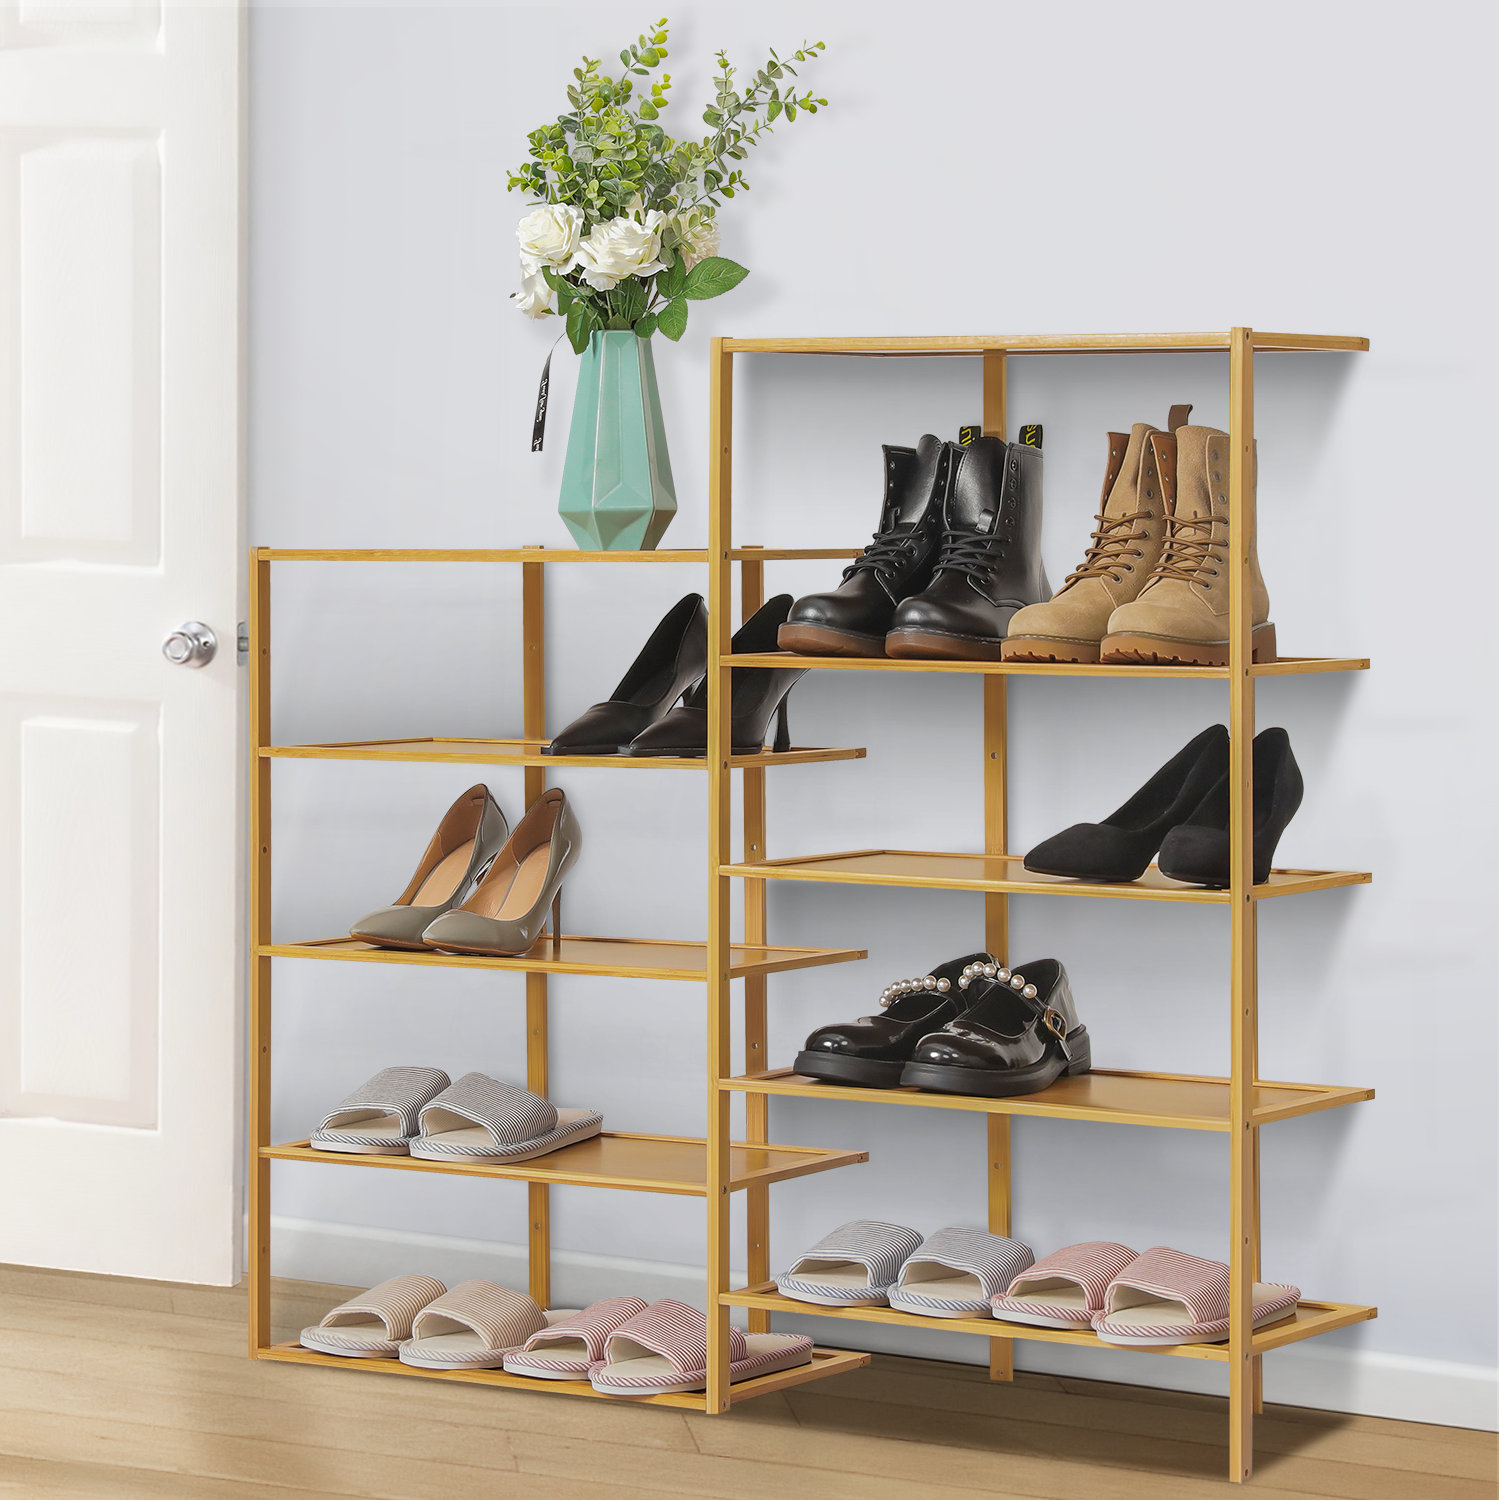 30 Pair Shoe Rack 1459014DS(LKFS10) - More Than A Furniture Store